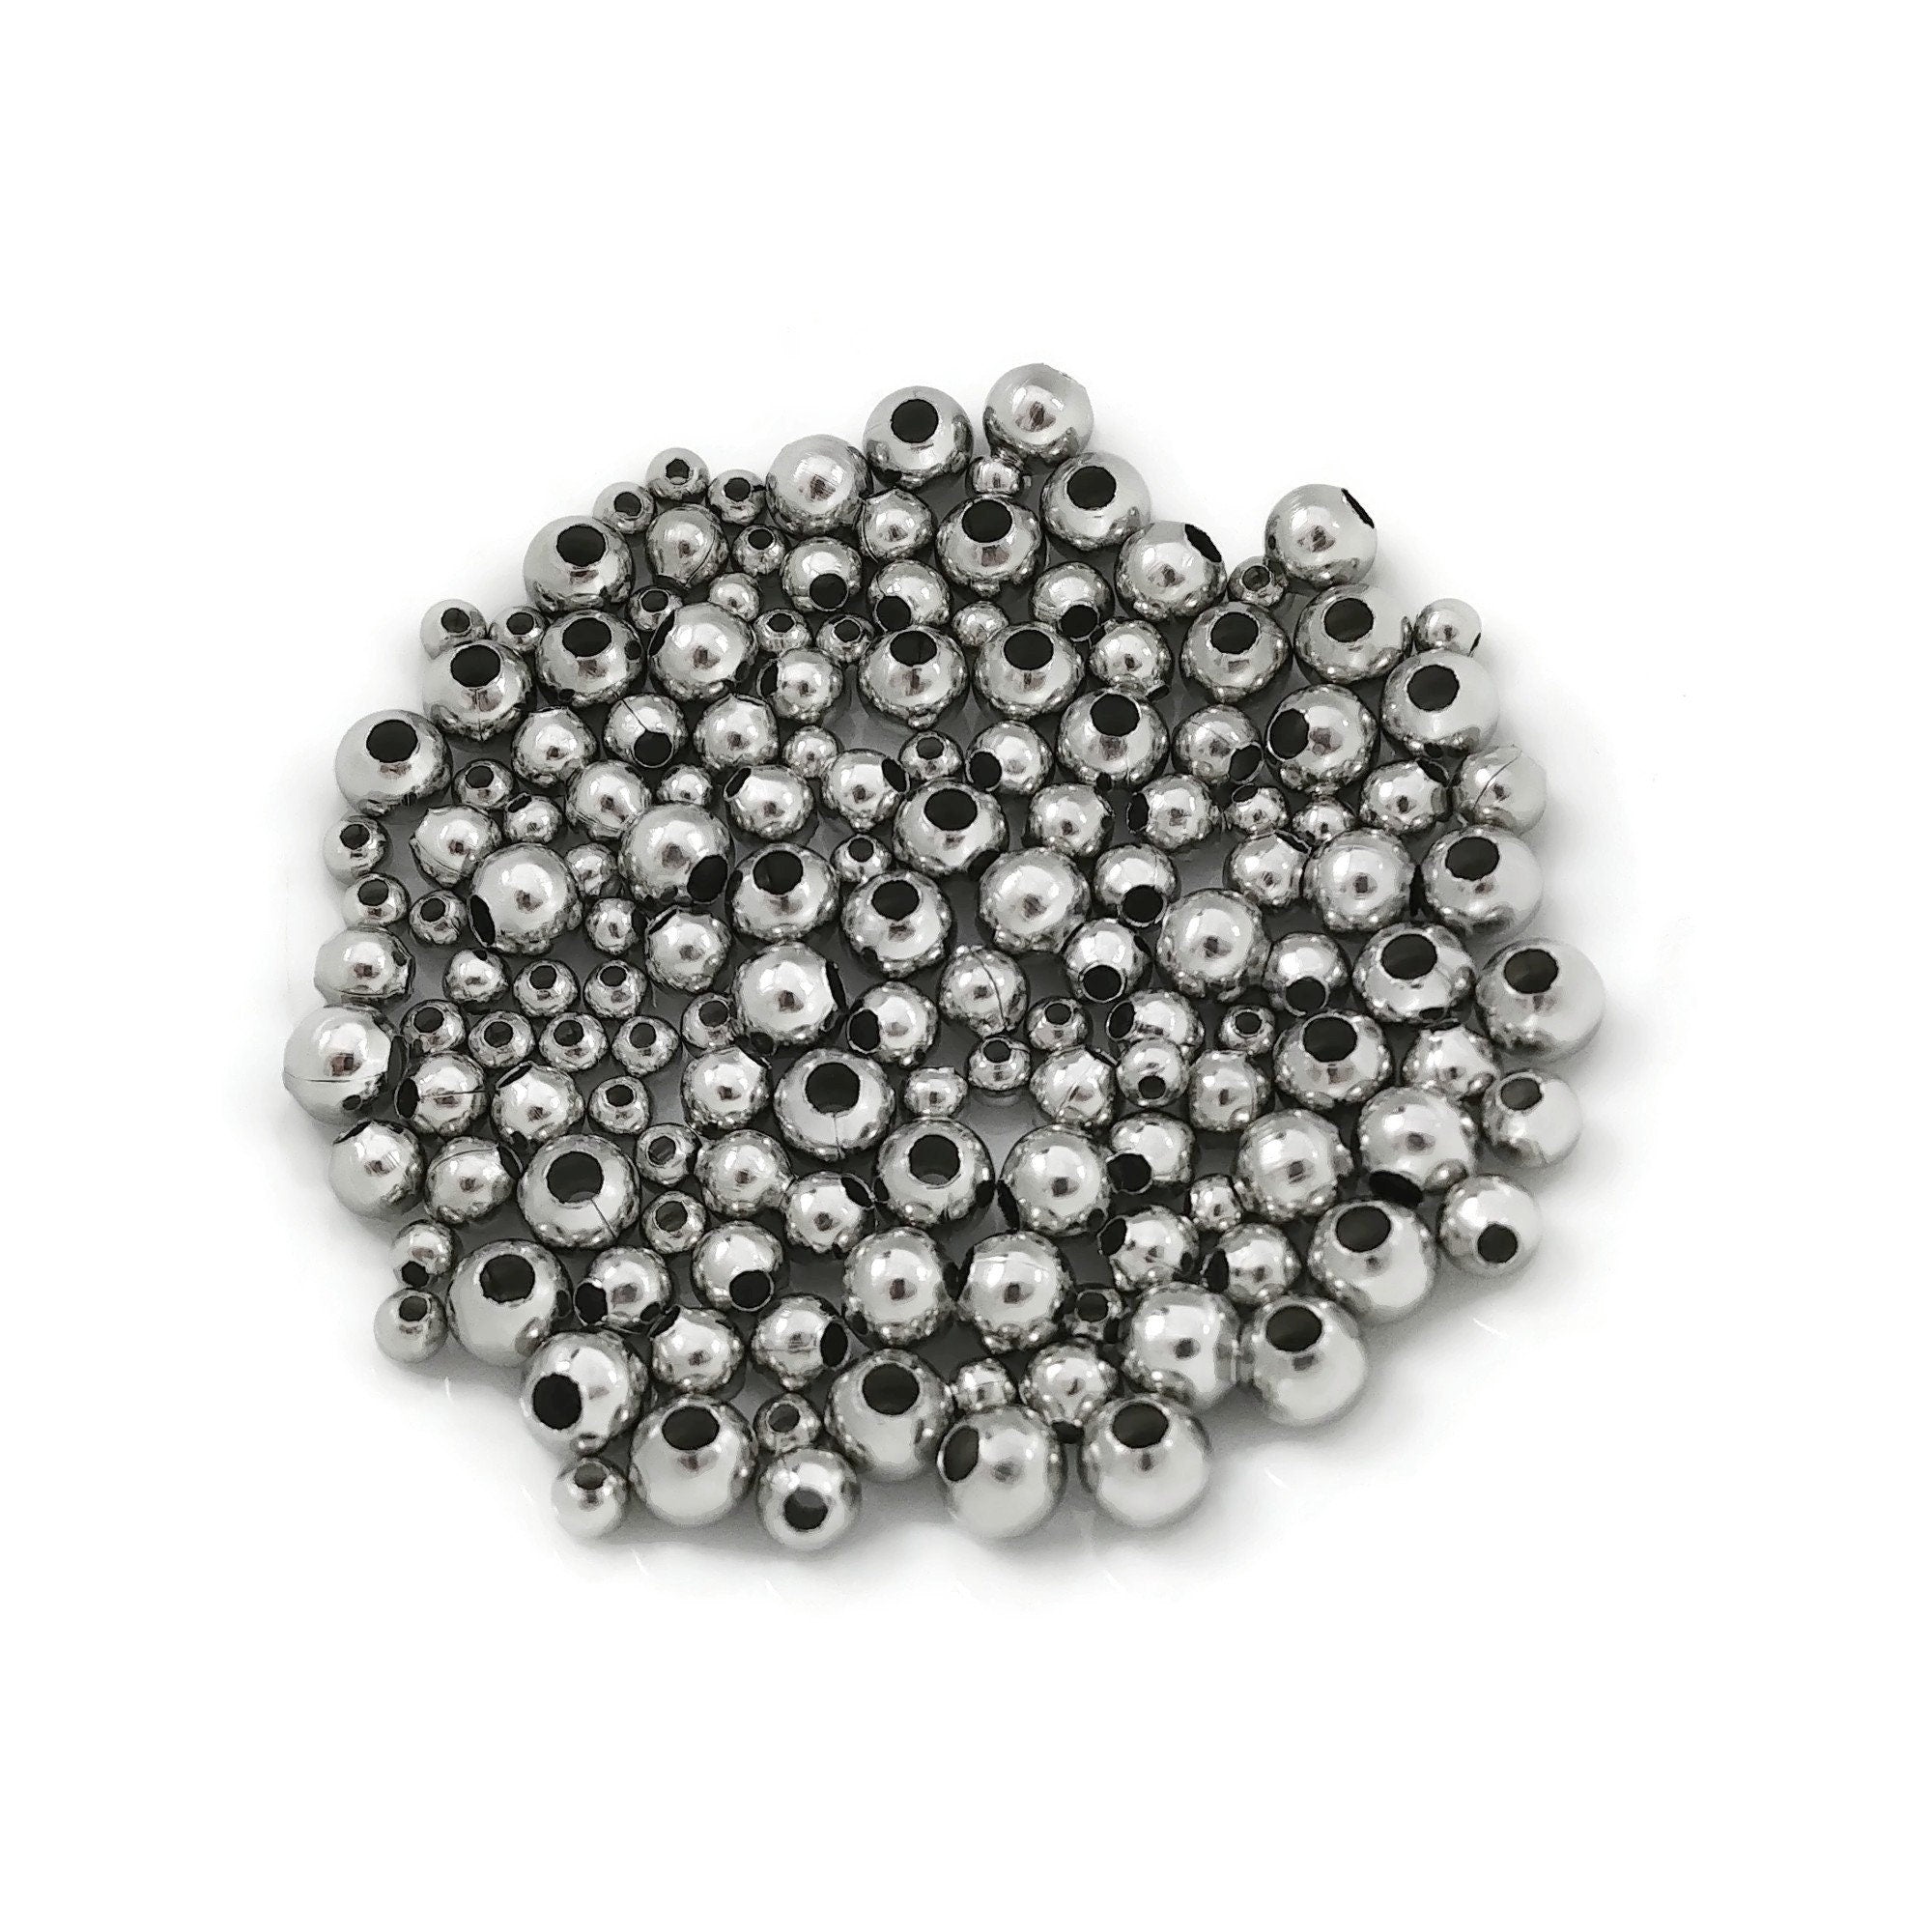 5mm Rondelle Spacer Beads / MB-003